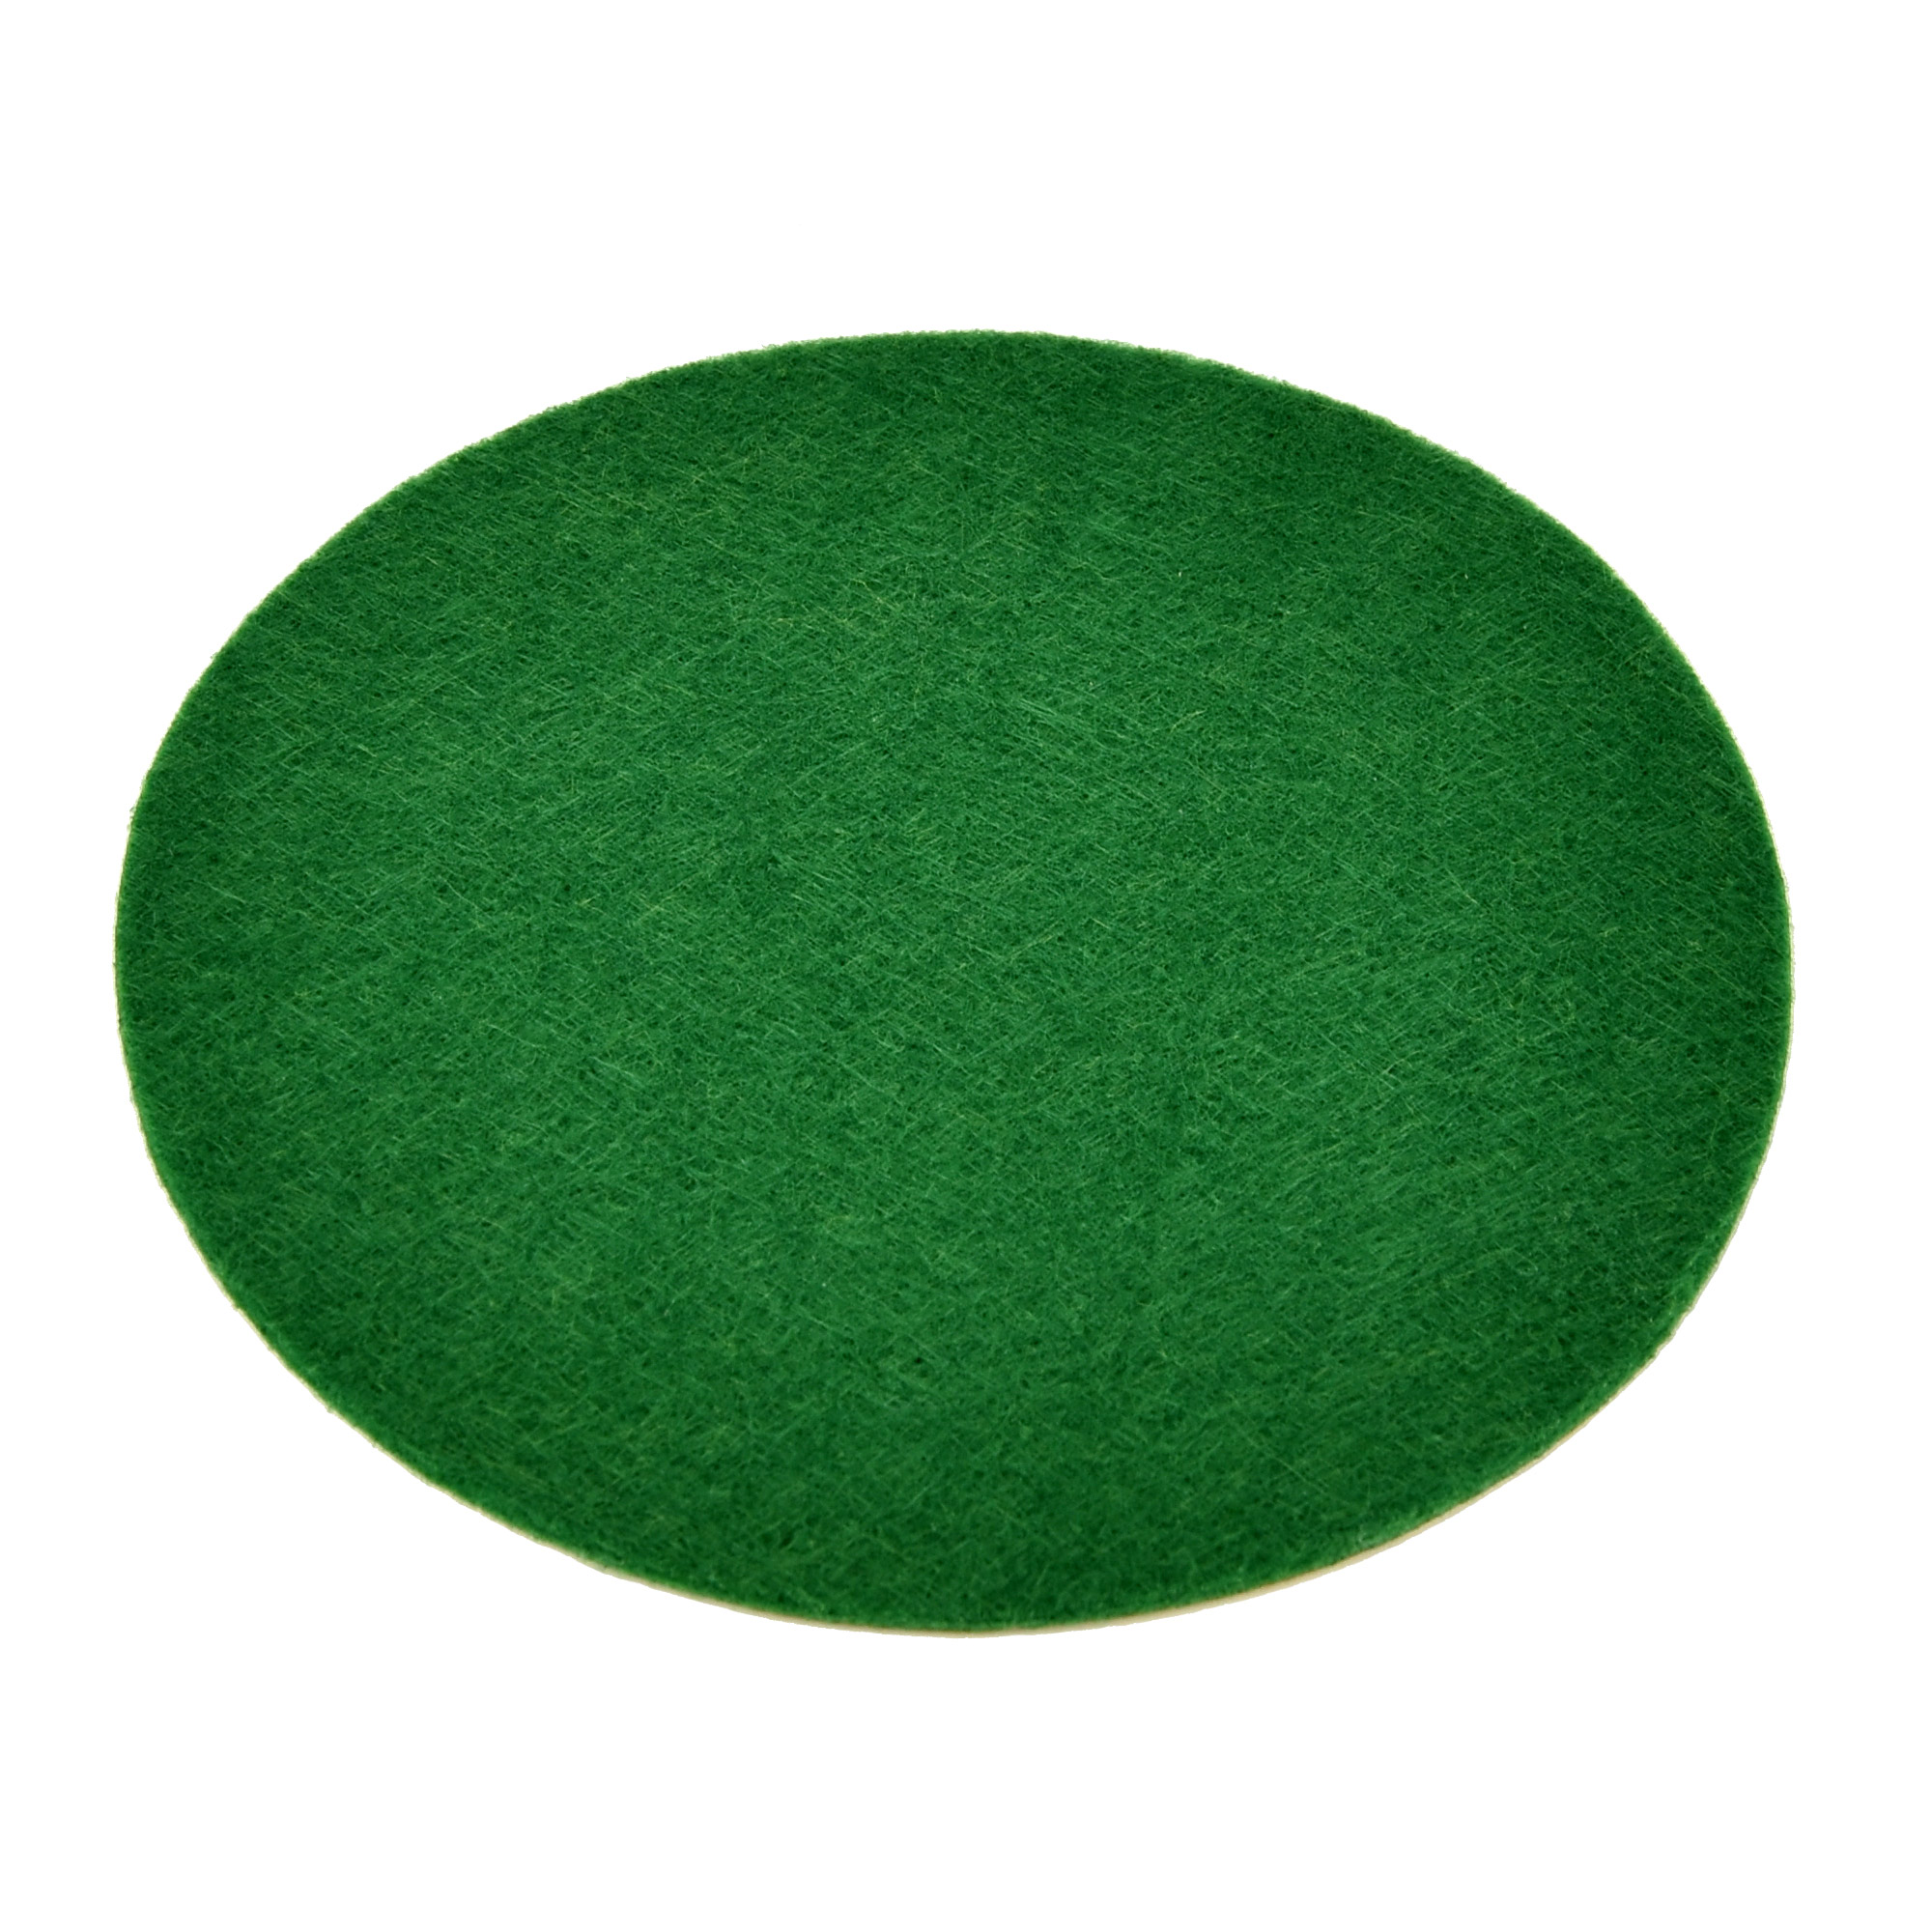 Replacement felt for Airhockey Pusher 95mm